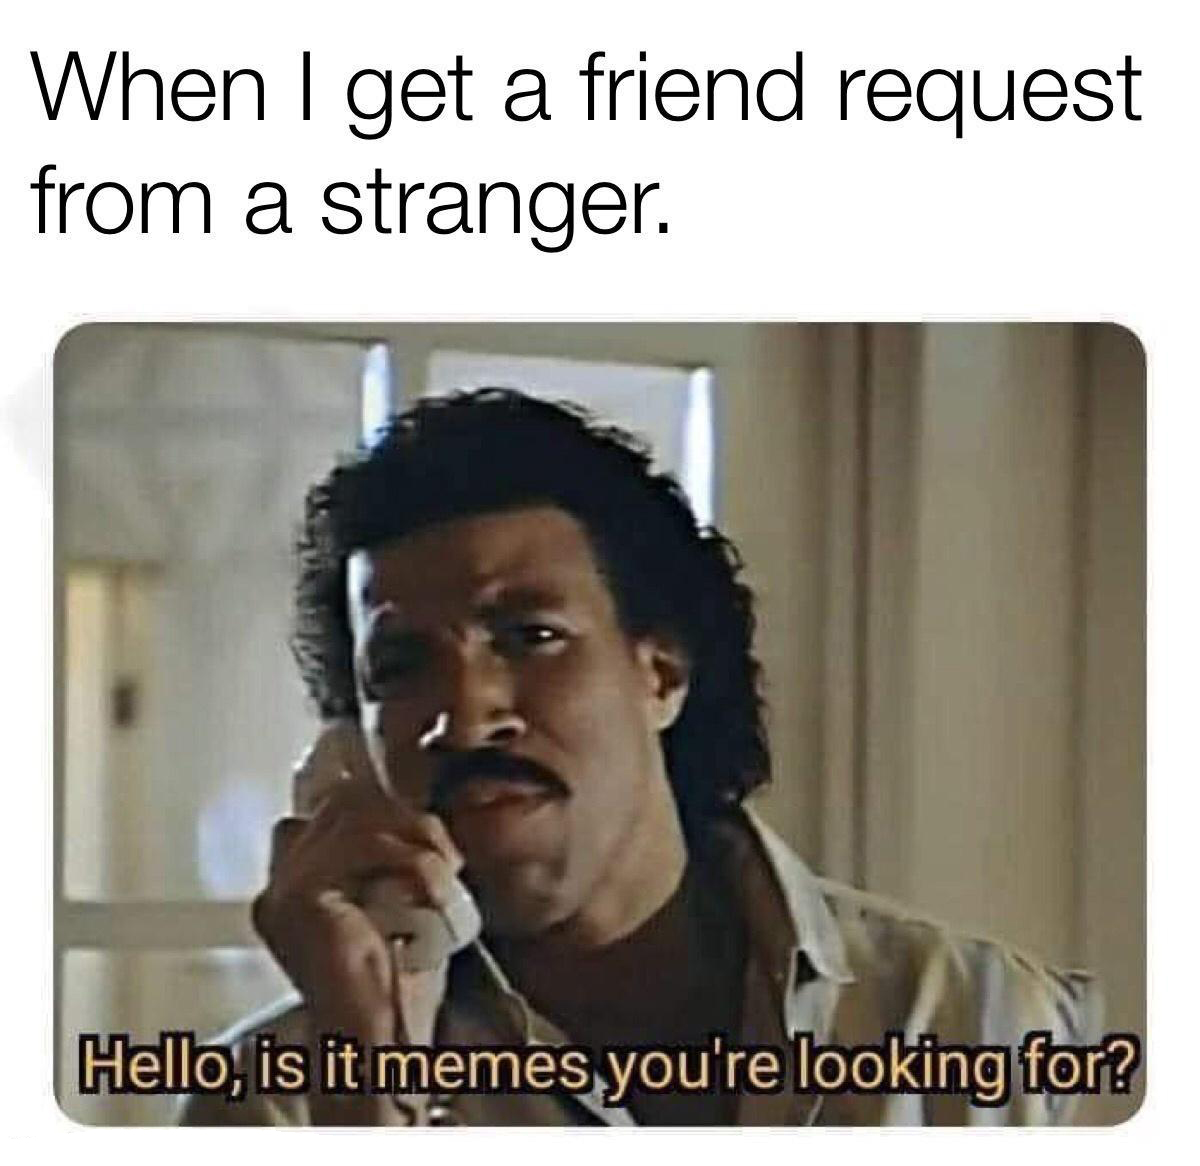 funny memes - dank memes - lionel richie is it me you re looking for gif - When I get a friend request from a stranger. a Hello, is it memes you're looking for?